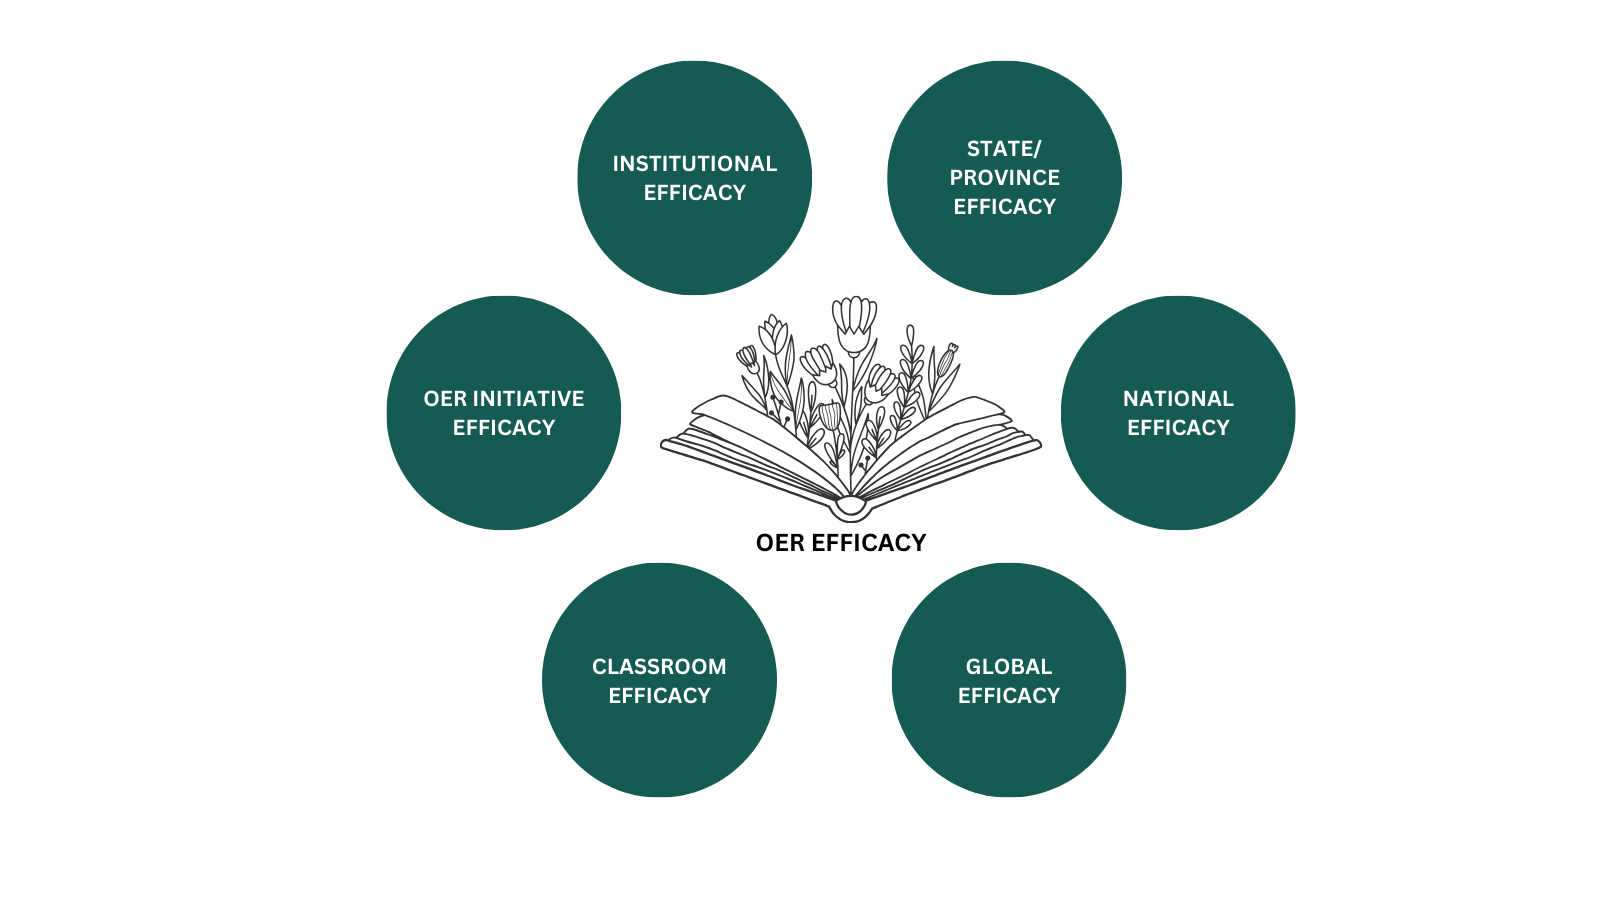 Diagram showing six different levels of OER Efficacy. Six dark green circles surround a sketch of an open book with flowers growing out of the pages, labelled "OER EFFICACY". From bottom left, green circles read: Classroom Efficacy, OER Initiative Efficacy, Institutional Efficacy, State/Province Efficacy, National Efficacy, and Global Efficacy.